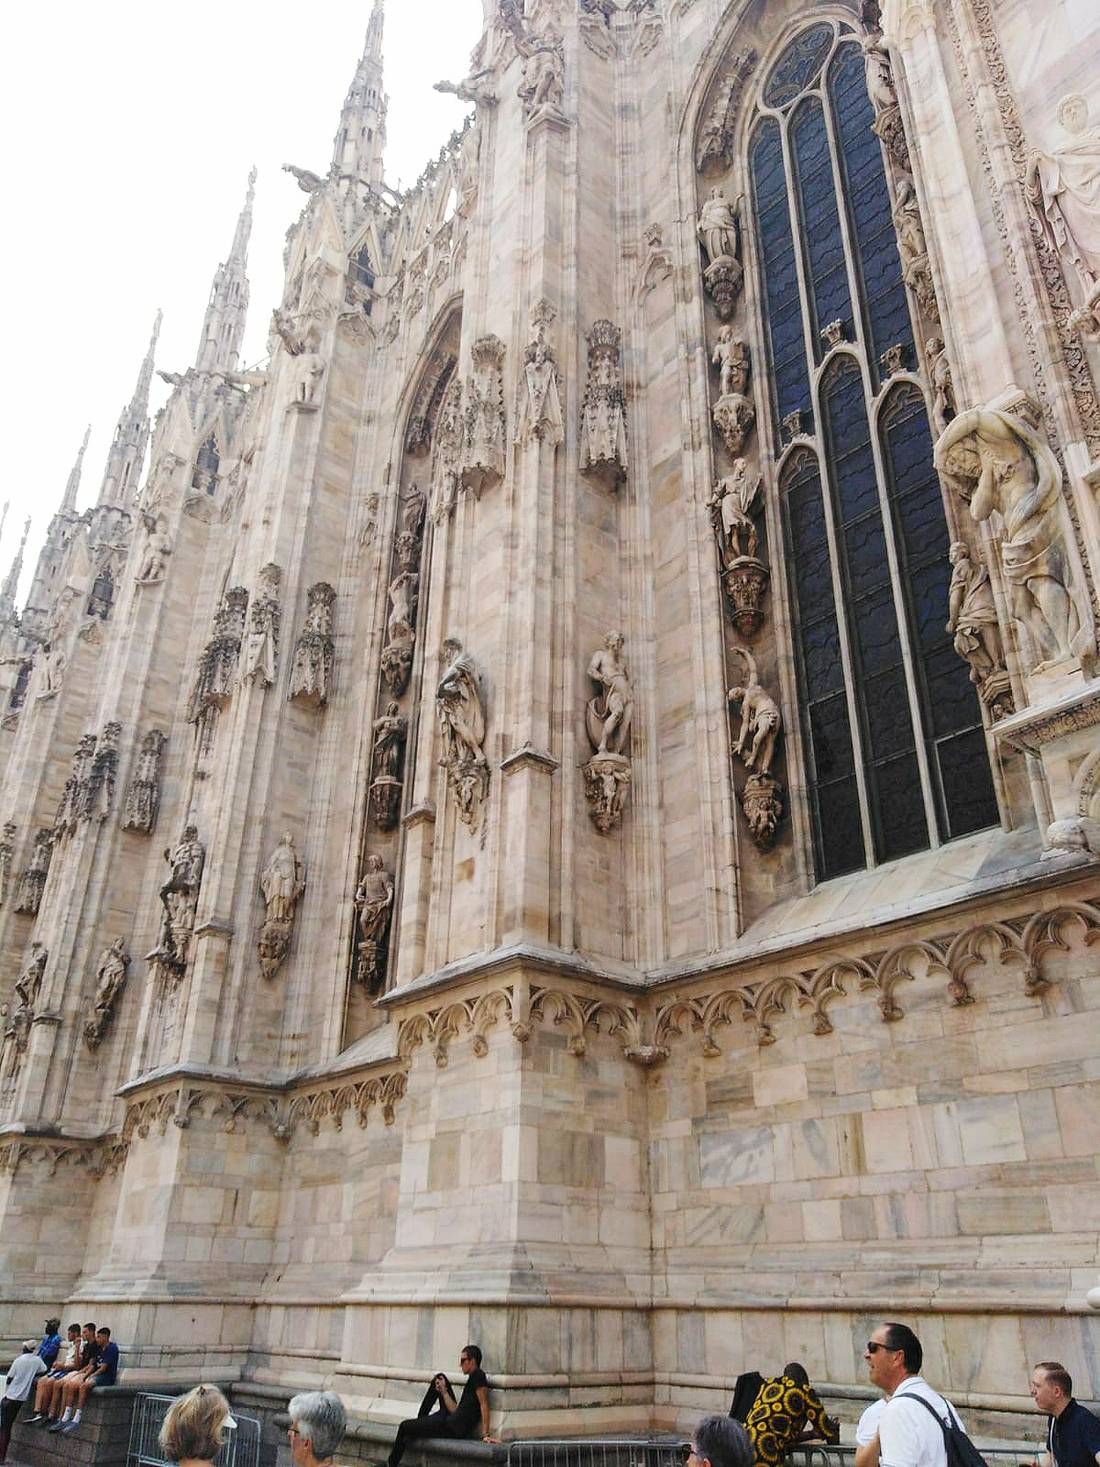 A wall of the cathedral from outside